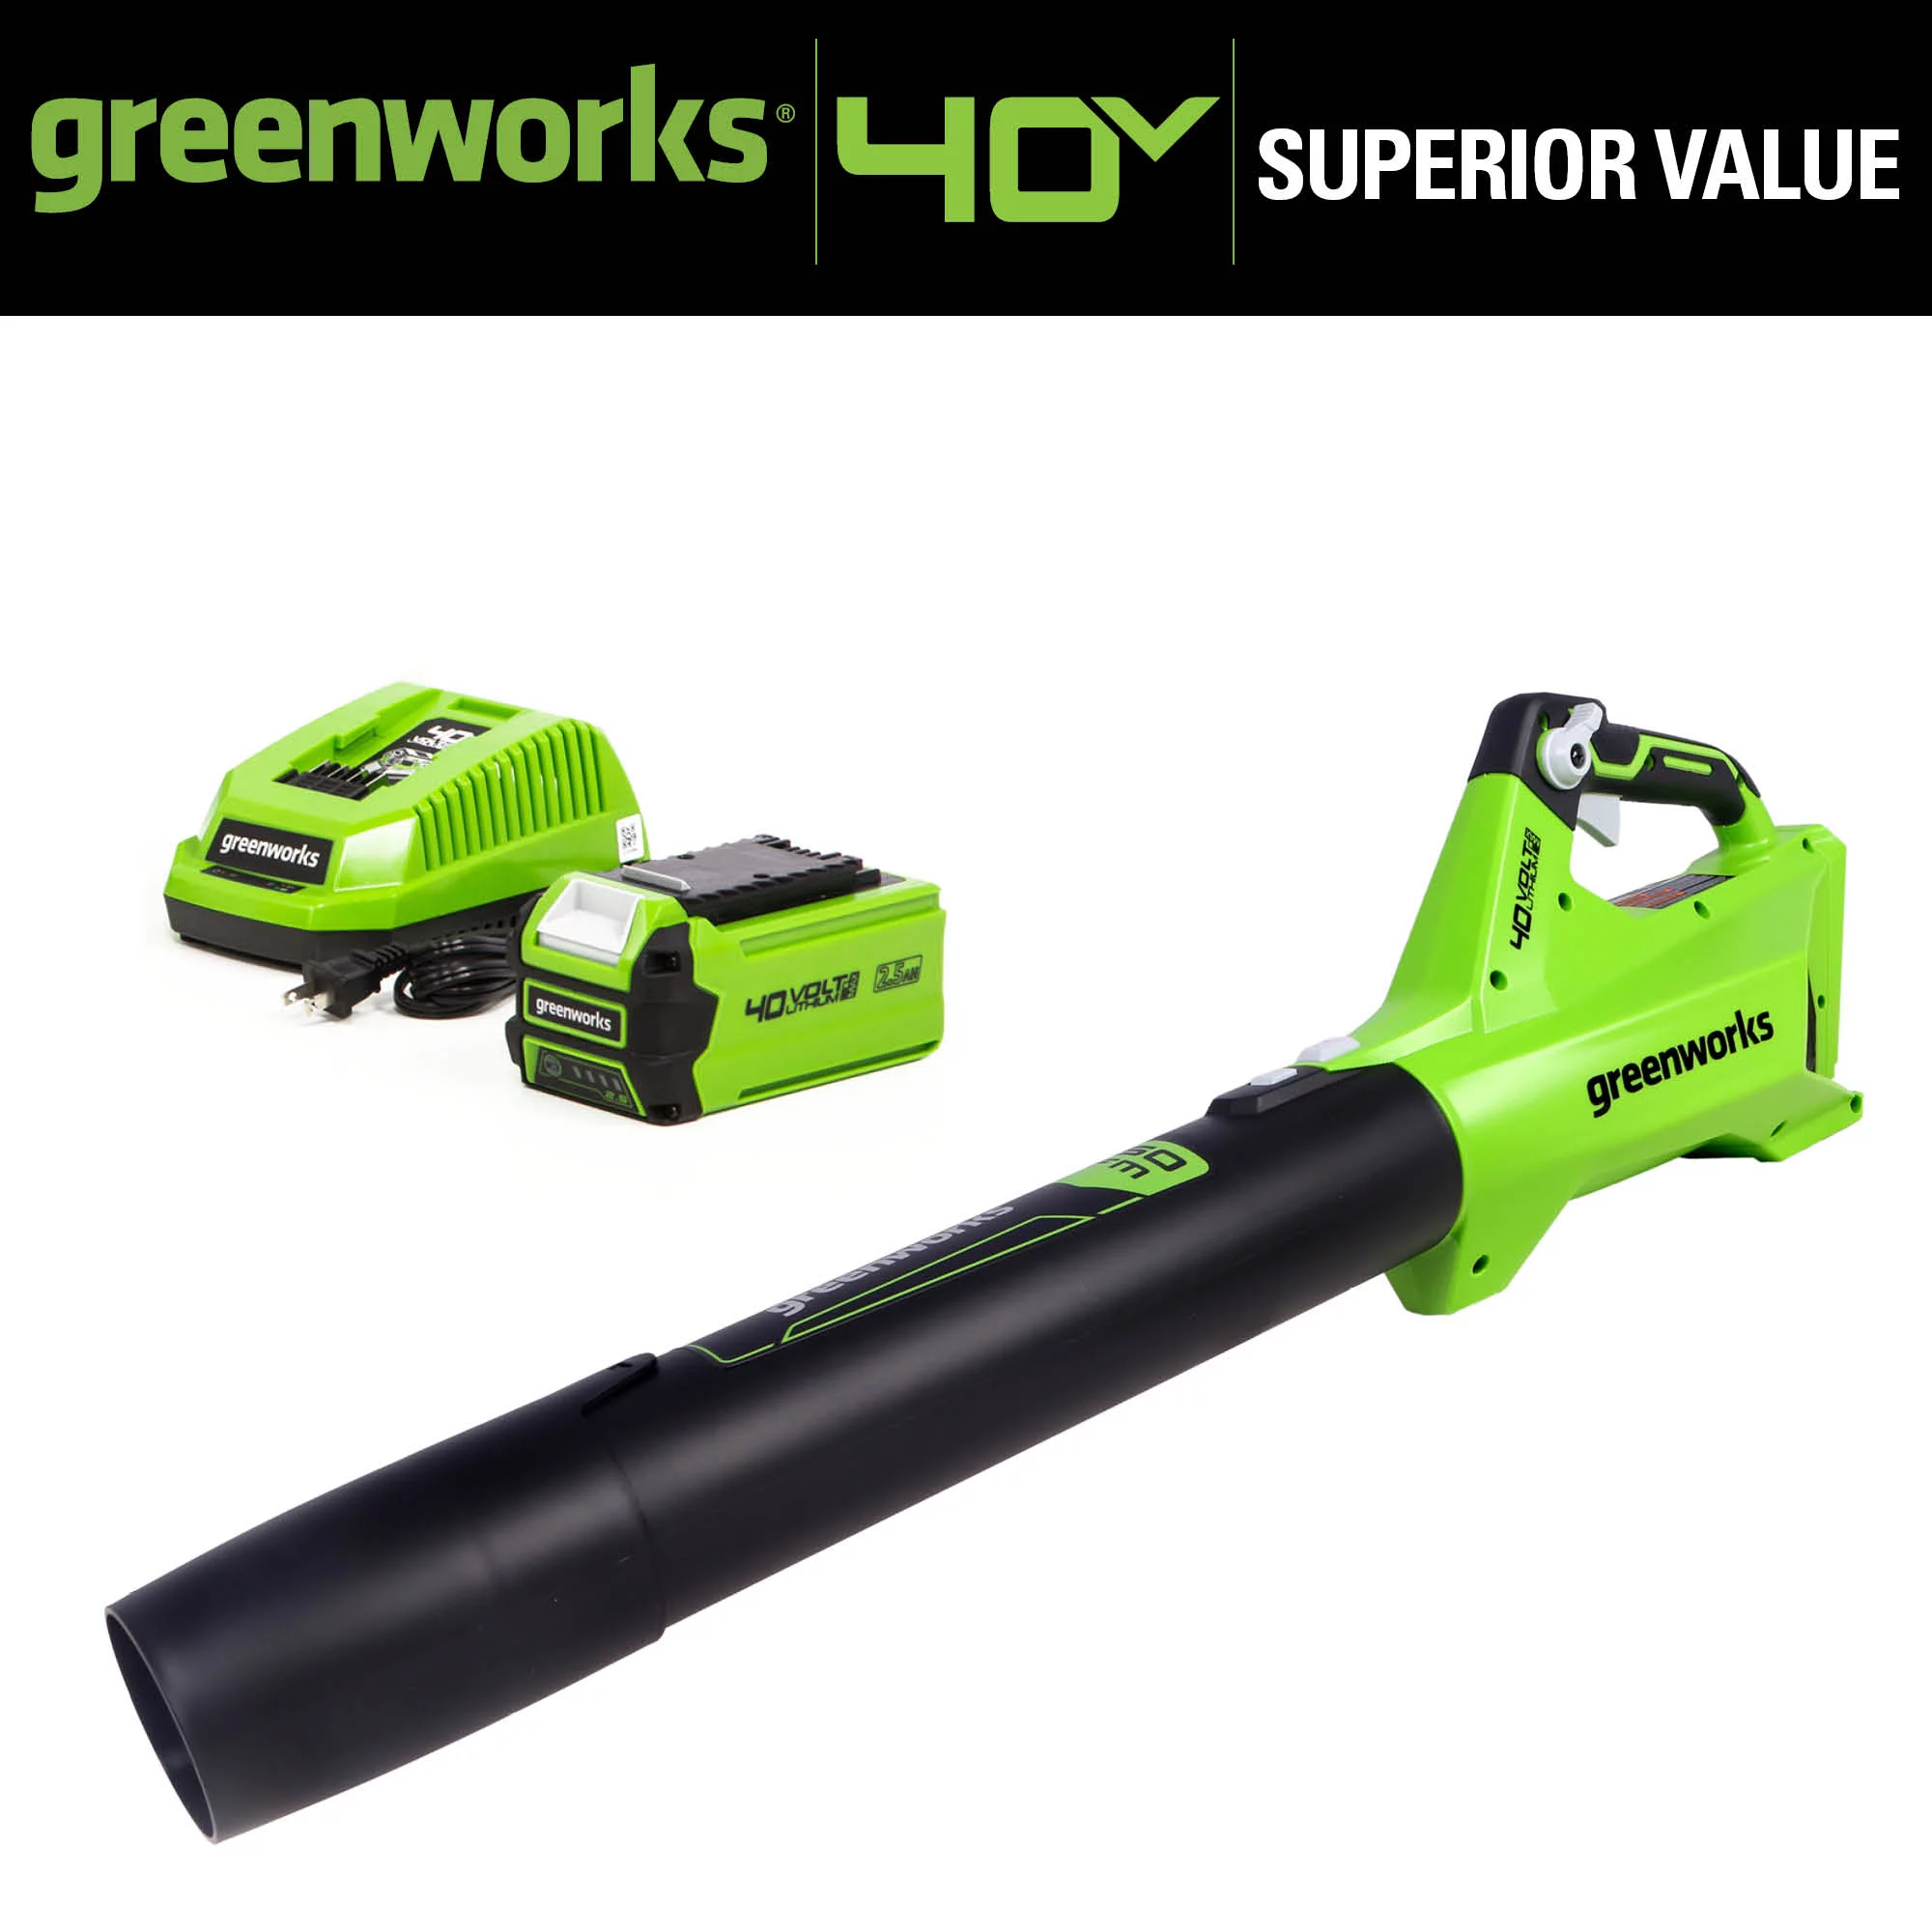 Greenworks 40V 450 CFM Leaf Blower with 2.5 Ah Battery and Quick Charger, 2411902